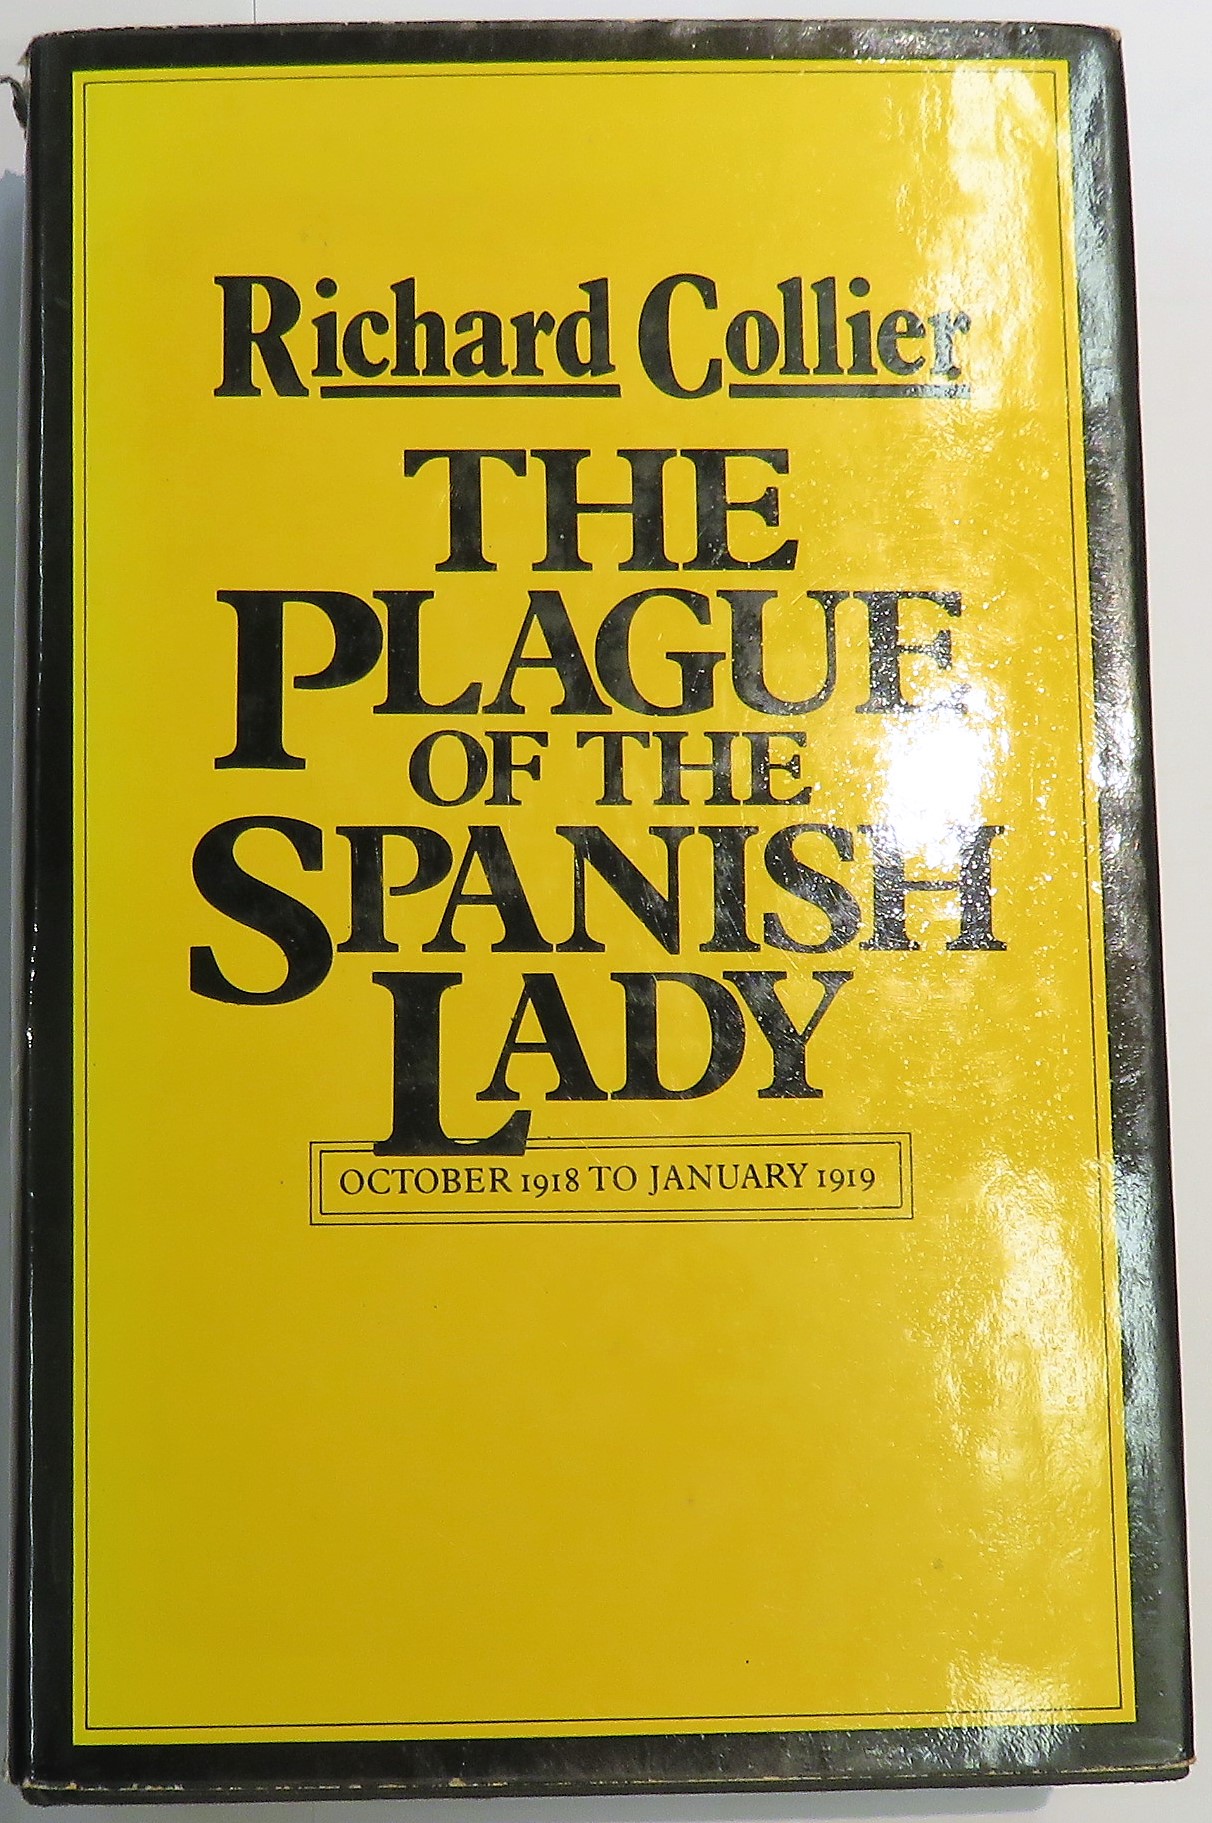 The Plague of the Spanish Lady